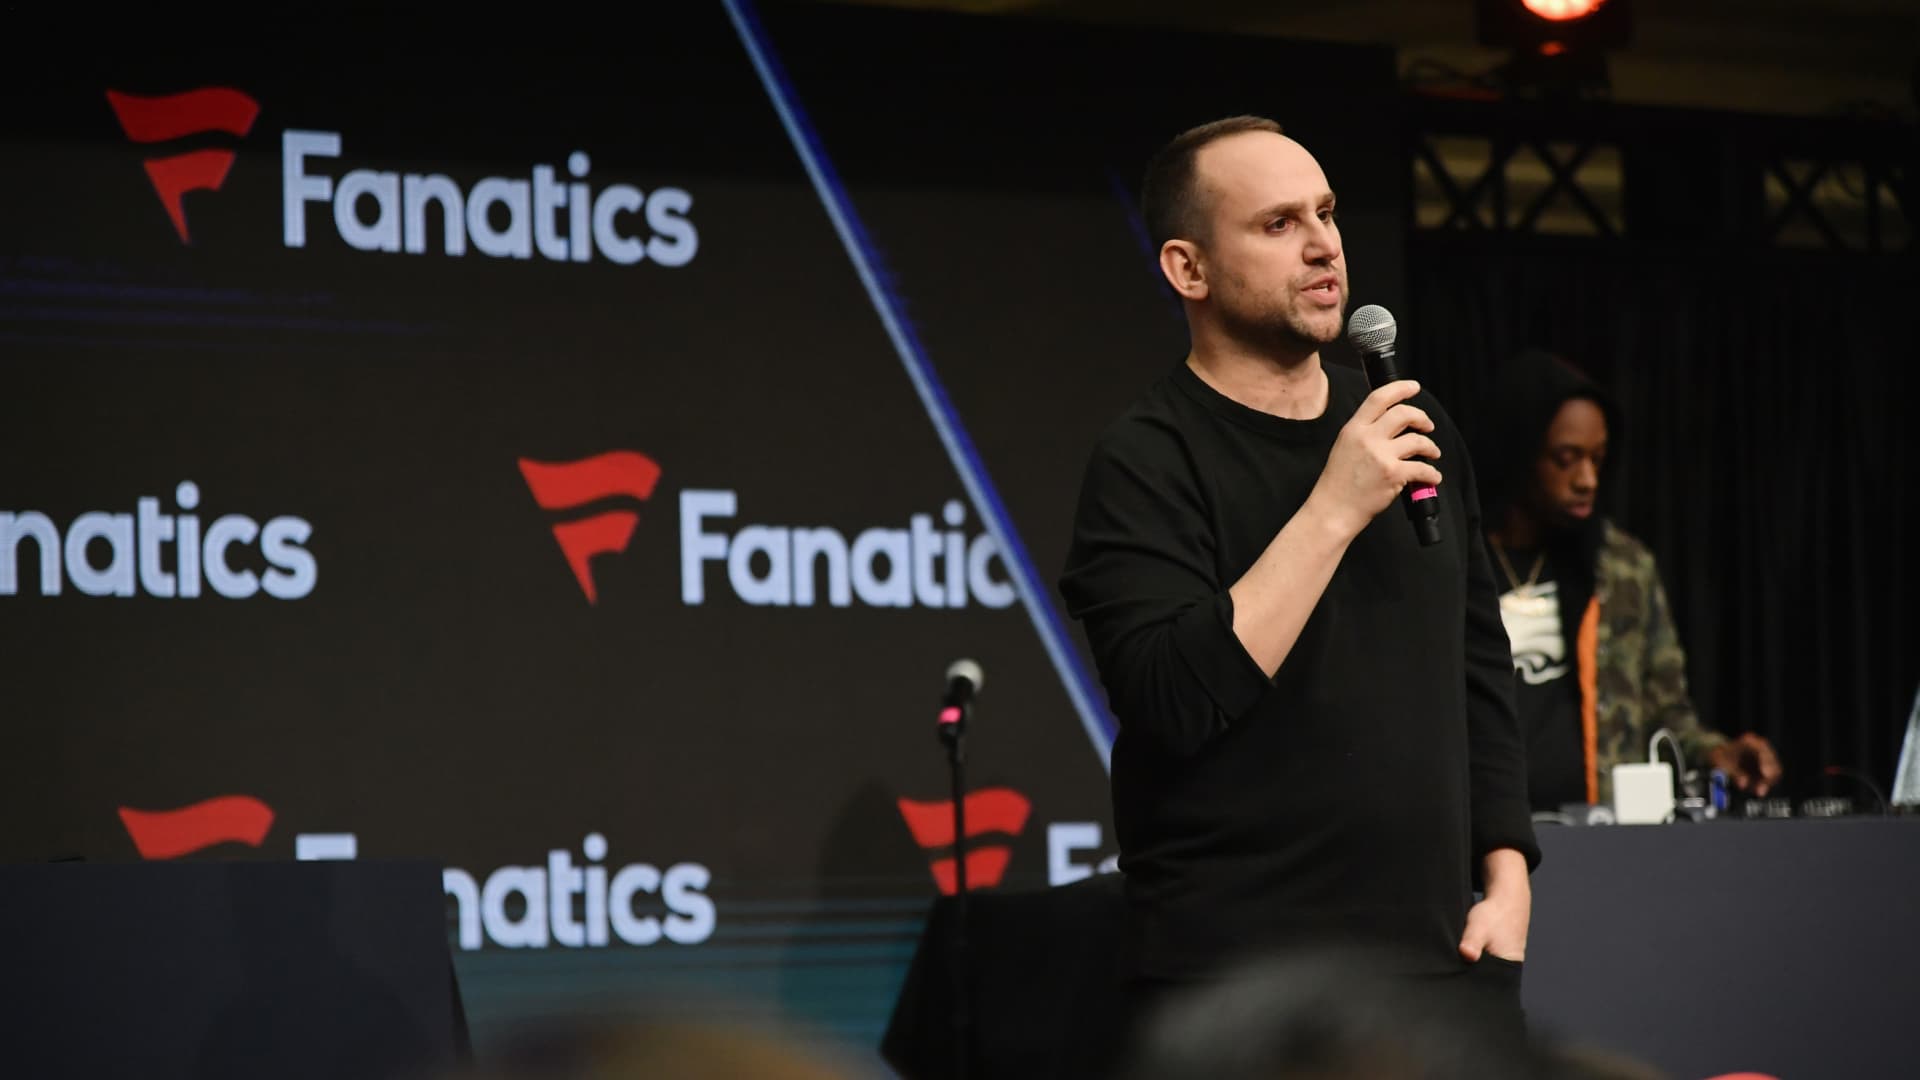 Fanatics is divesting its 60% stake in NFT company Candy Digital